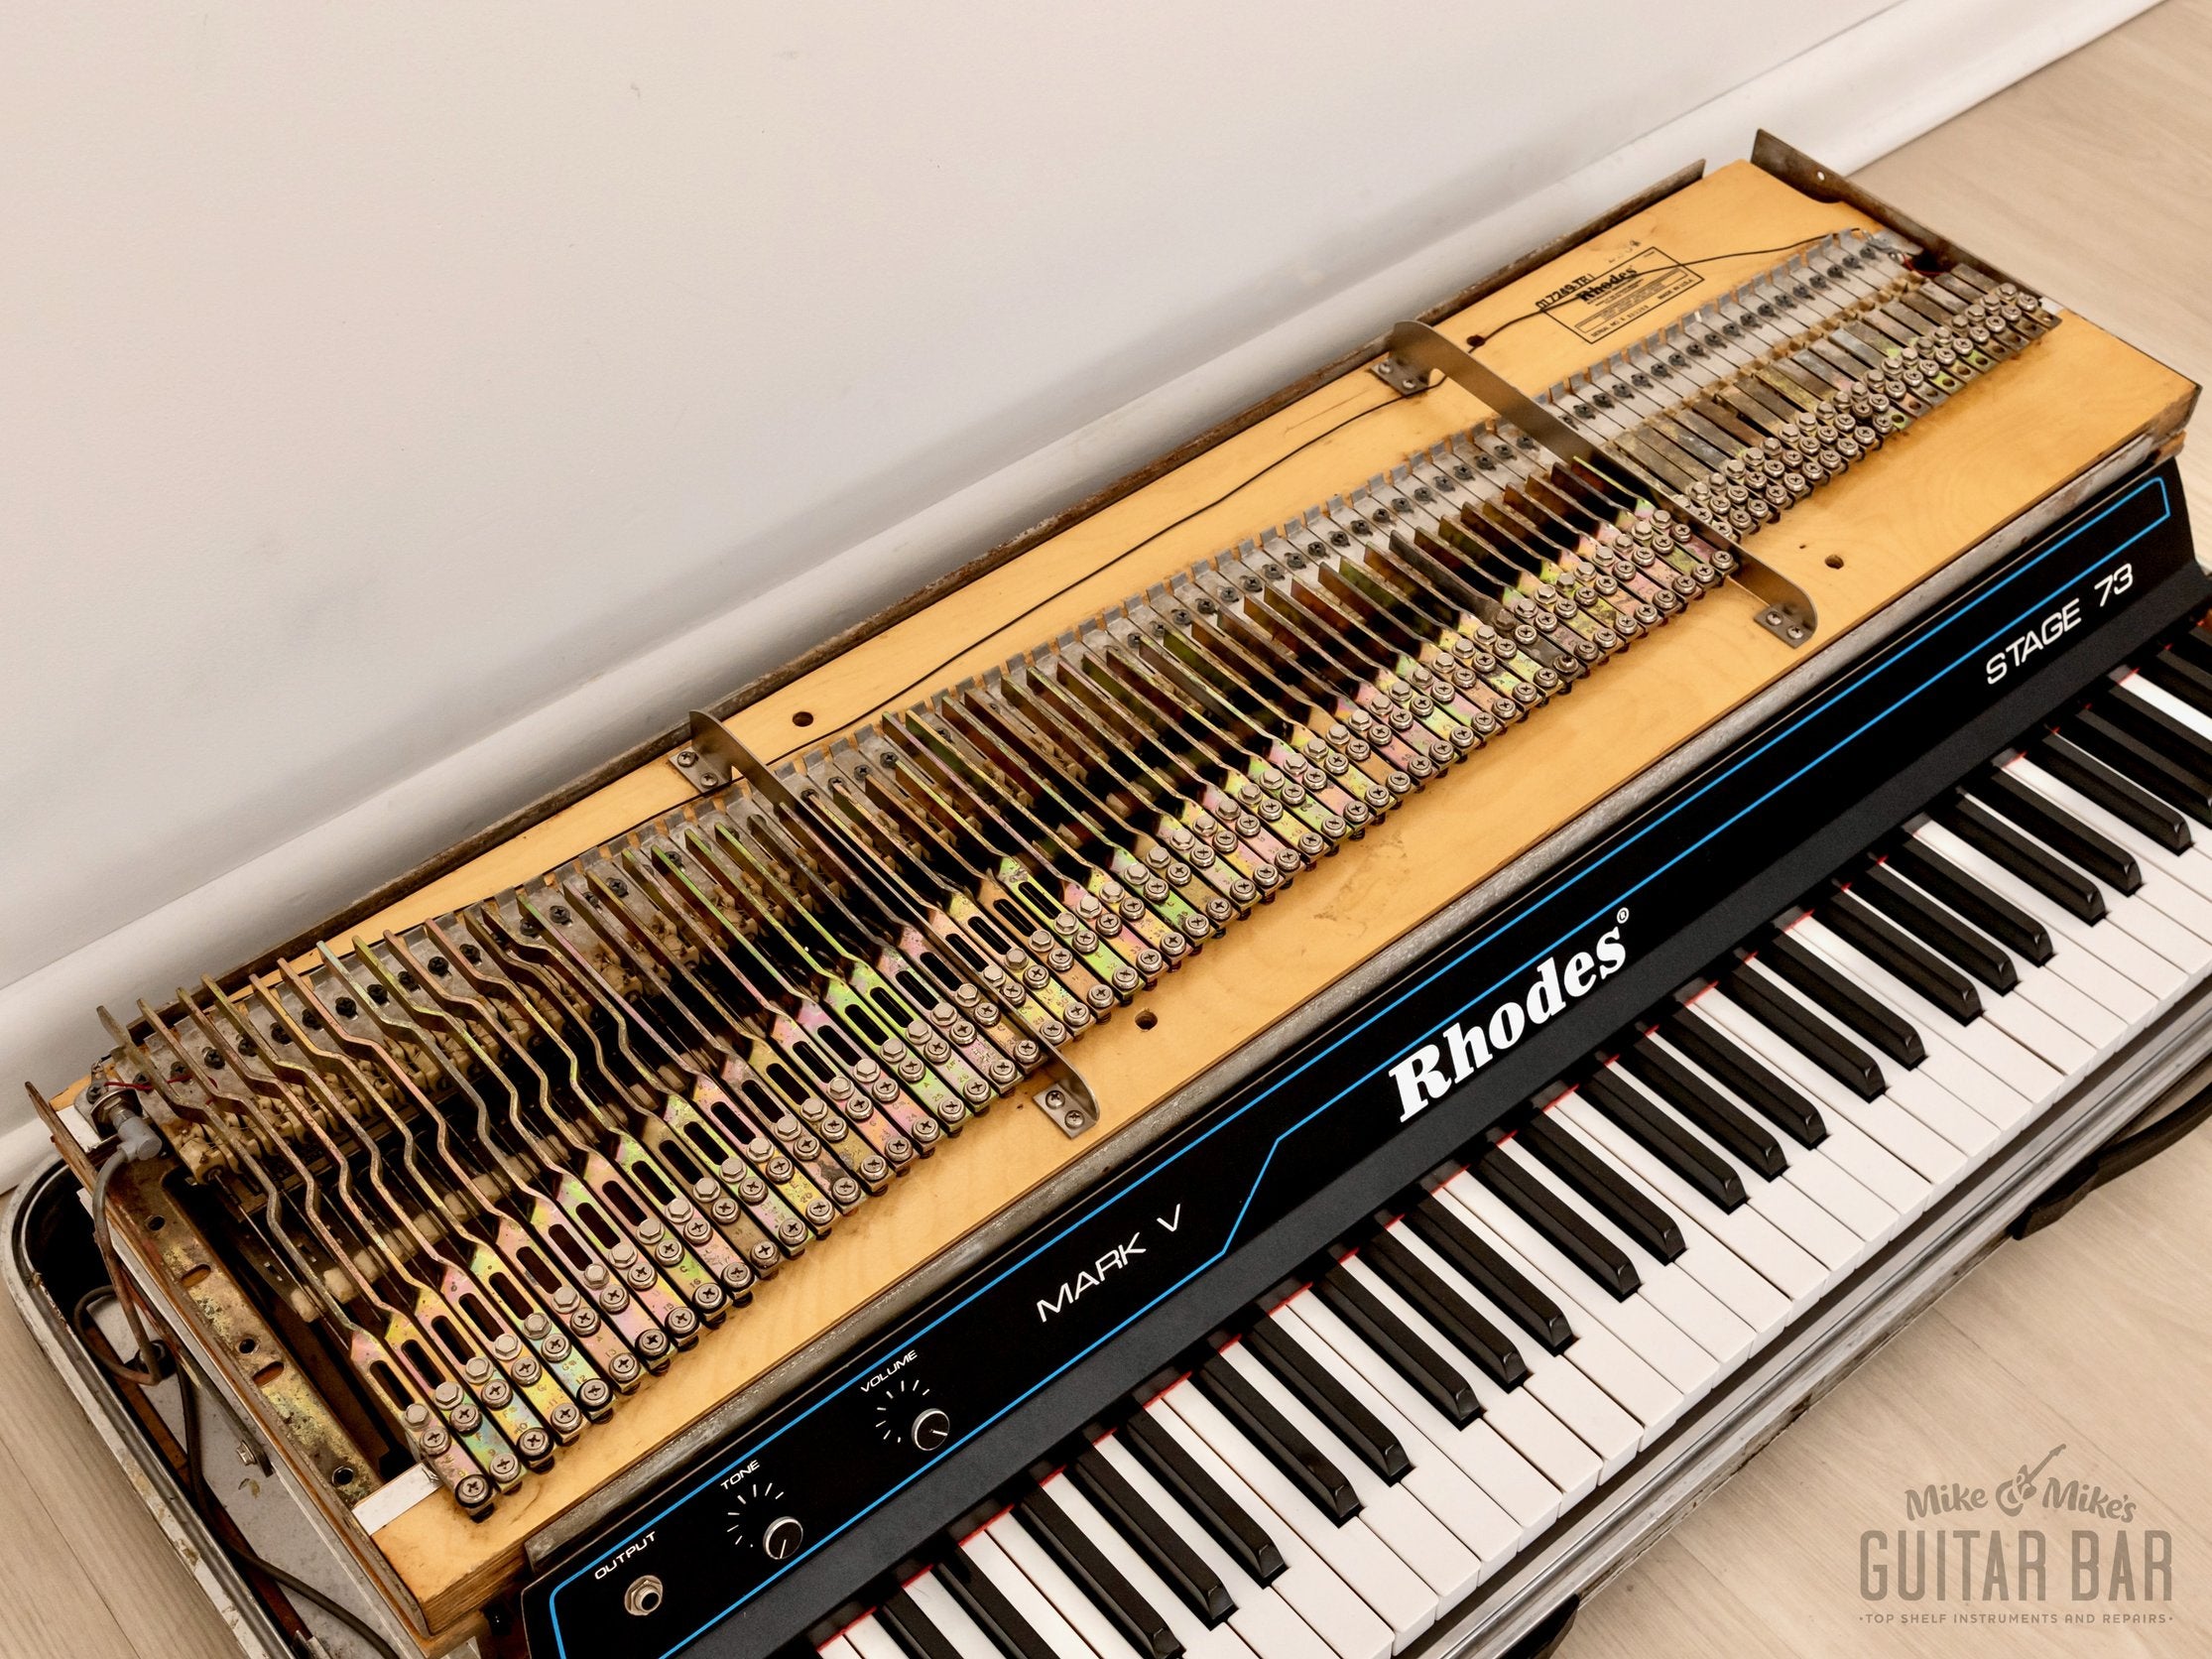 1984 Rhodes Mark V Vintage Electric Piano, Fully Serviced w/ Lid & Sustain Pedal